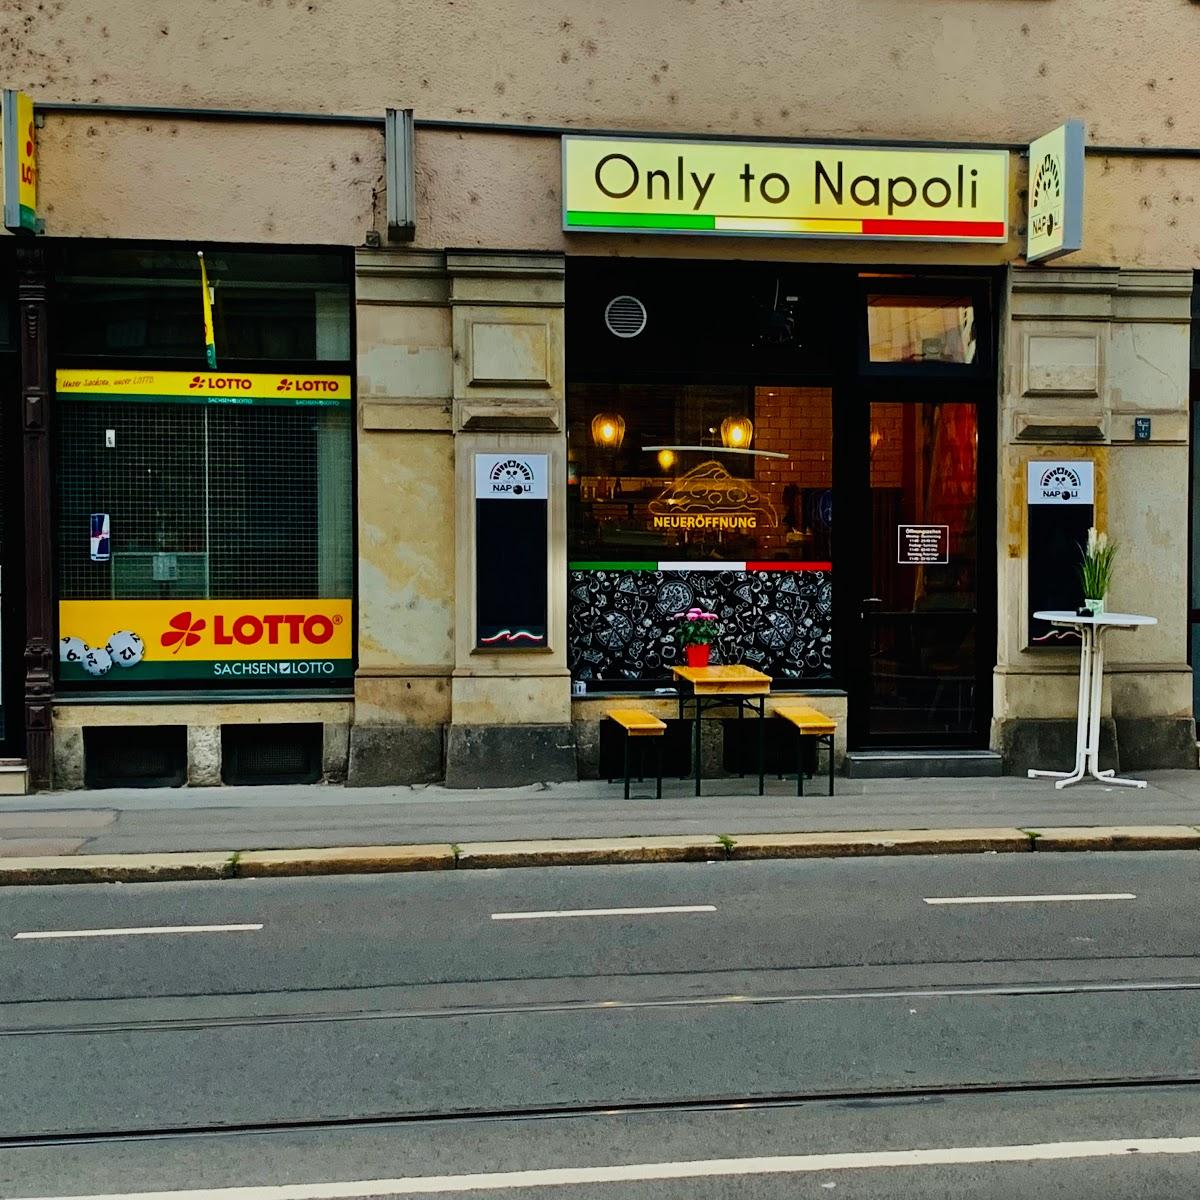 Restaurant "Only to napoli pizza service" in Leipzig